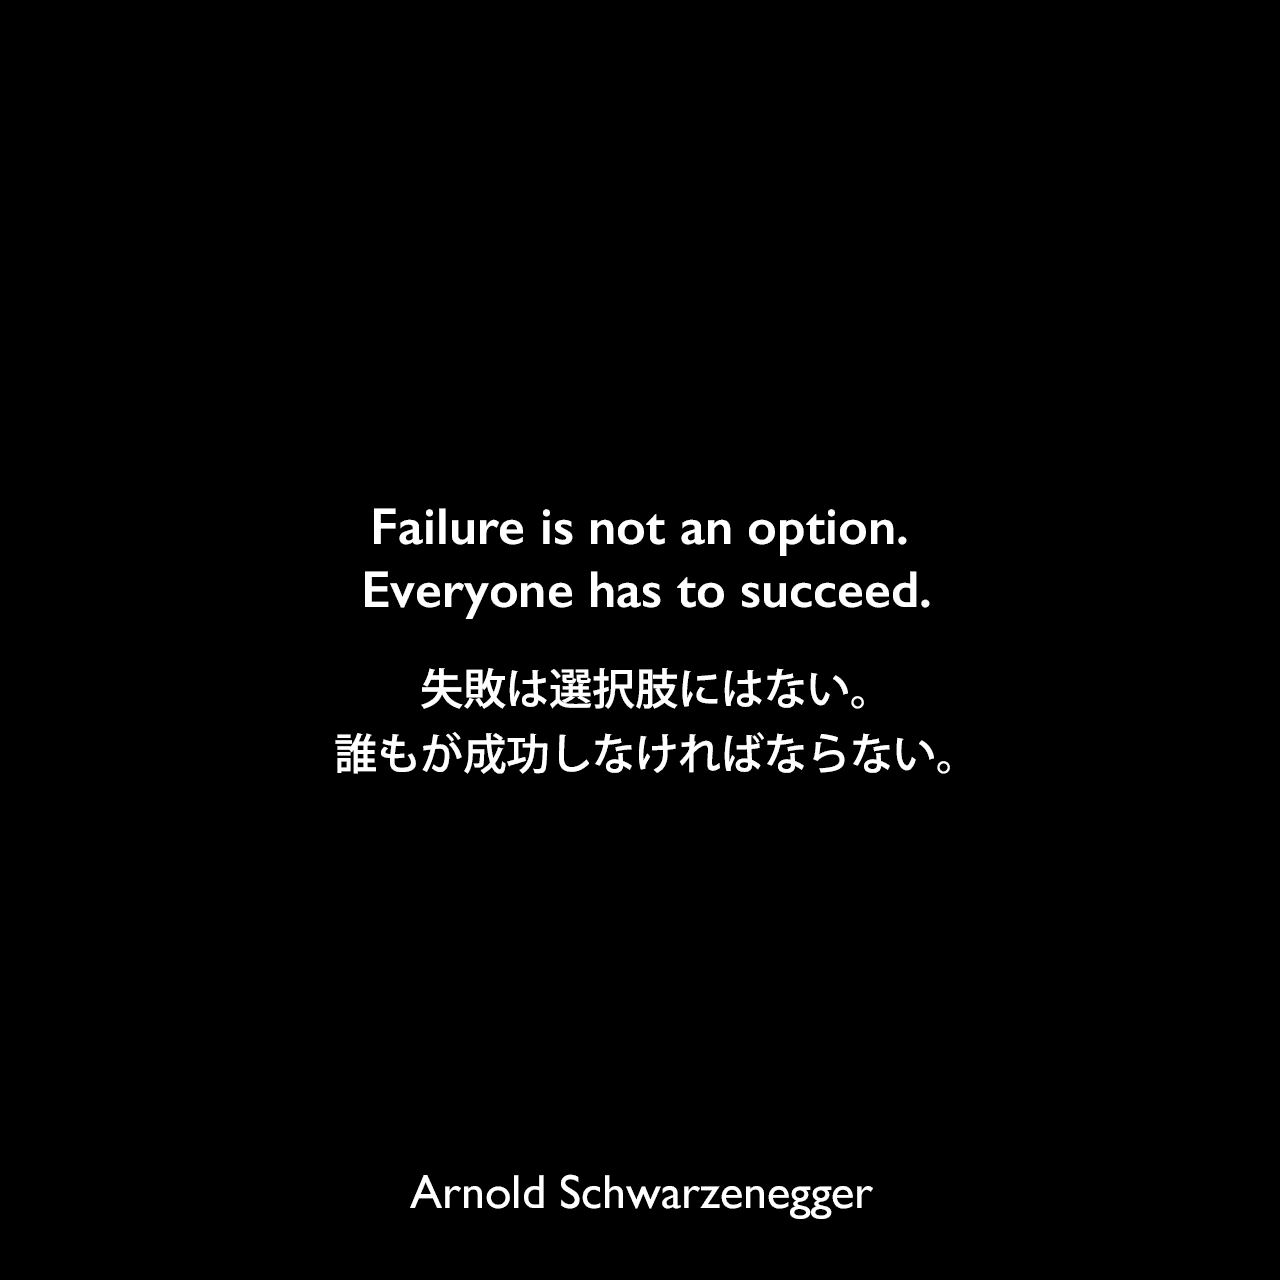 Failure is not an option. Everyone has to succeed.失敗は選択肢にはない。誰もが成功しなければならない。Arnold Schwarzenegger